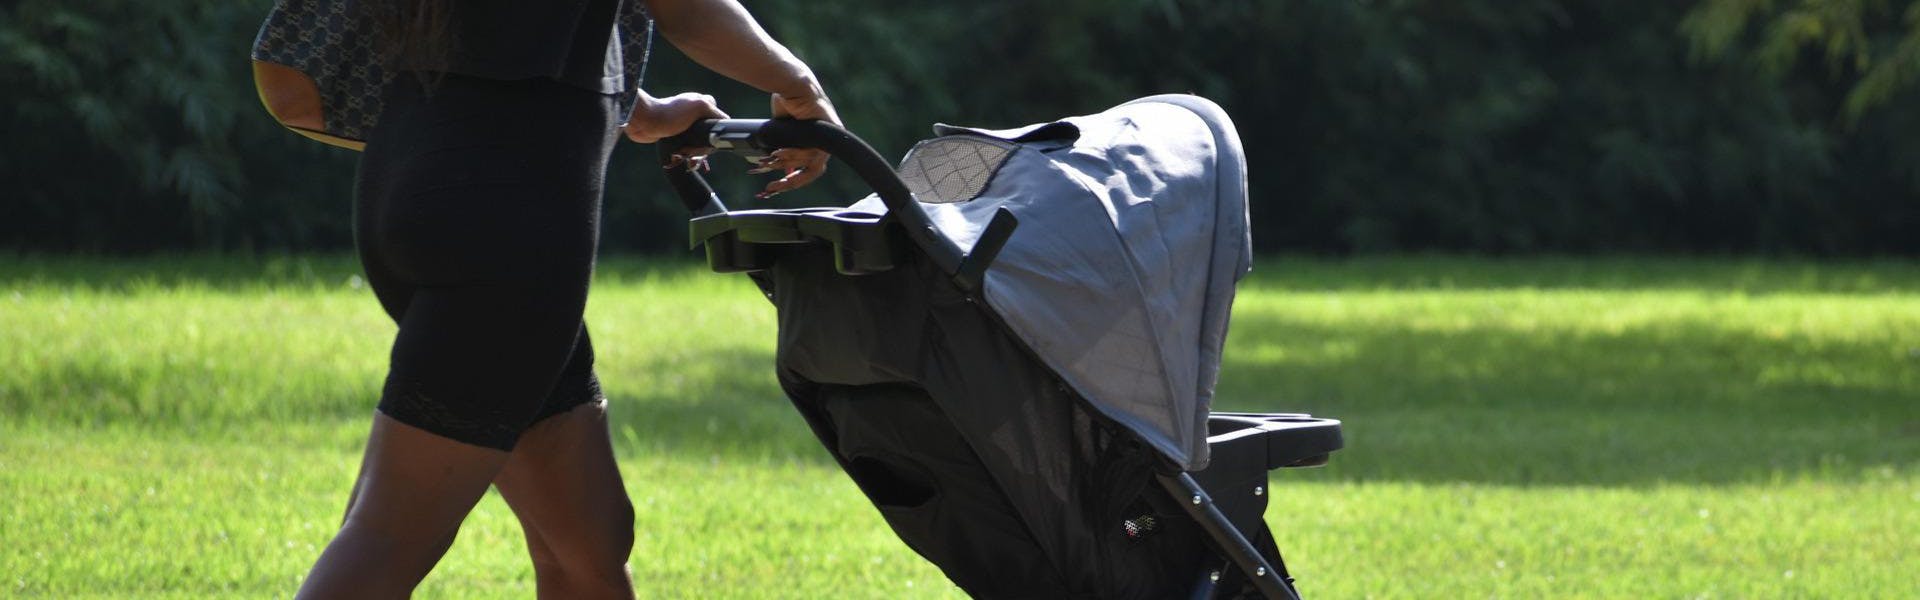 A woman with a bag pushes a baby stroller.